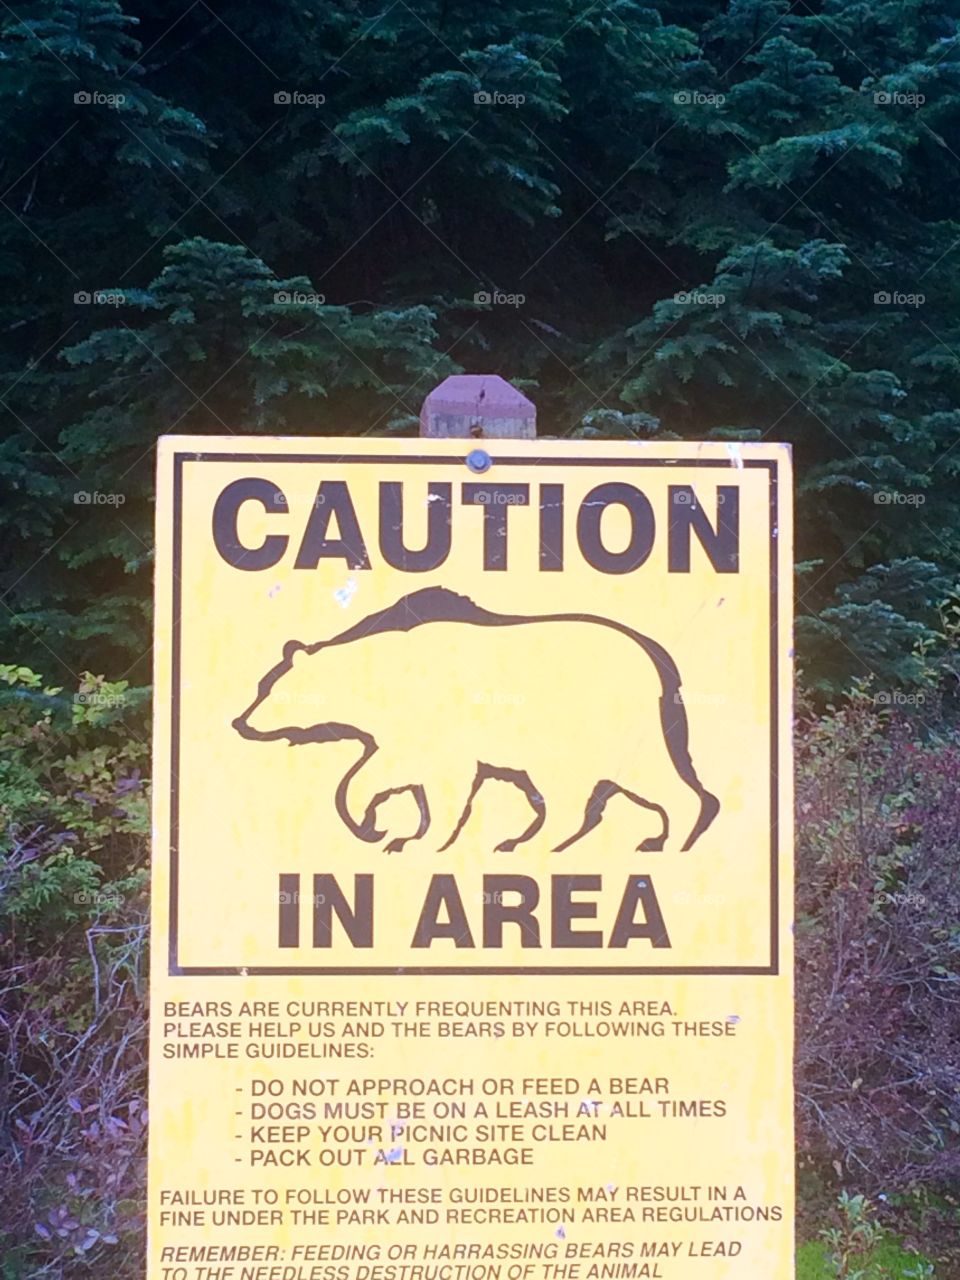 Heading out for a day hike up in the mountains, we come across this sign at the start. Hmmm..... We'll be safe right??
